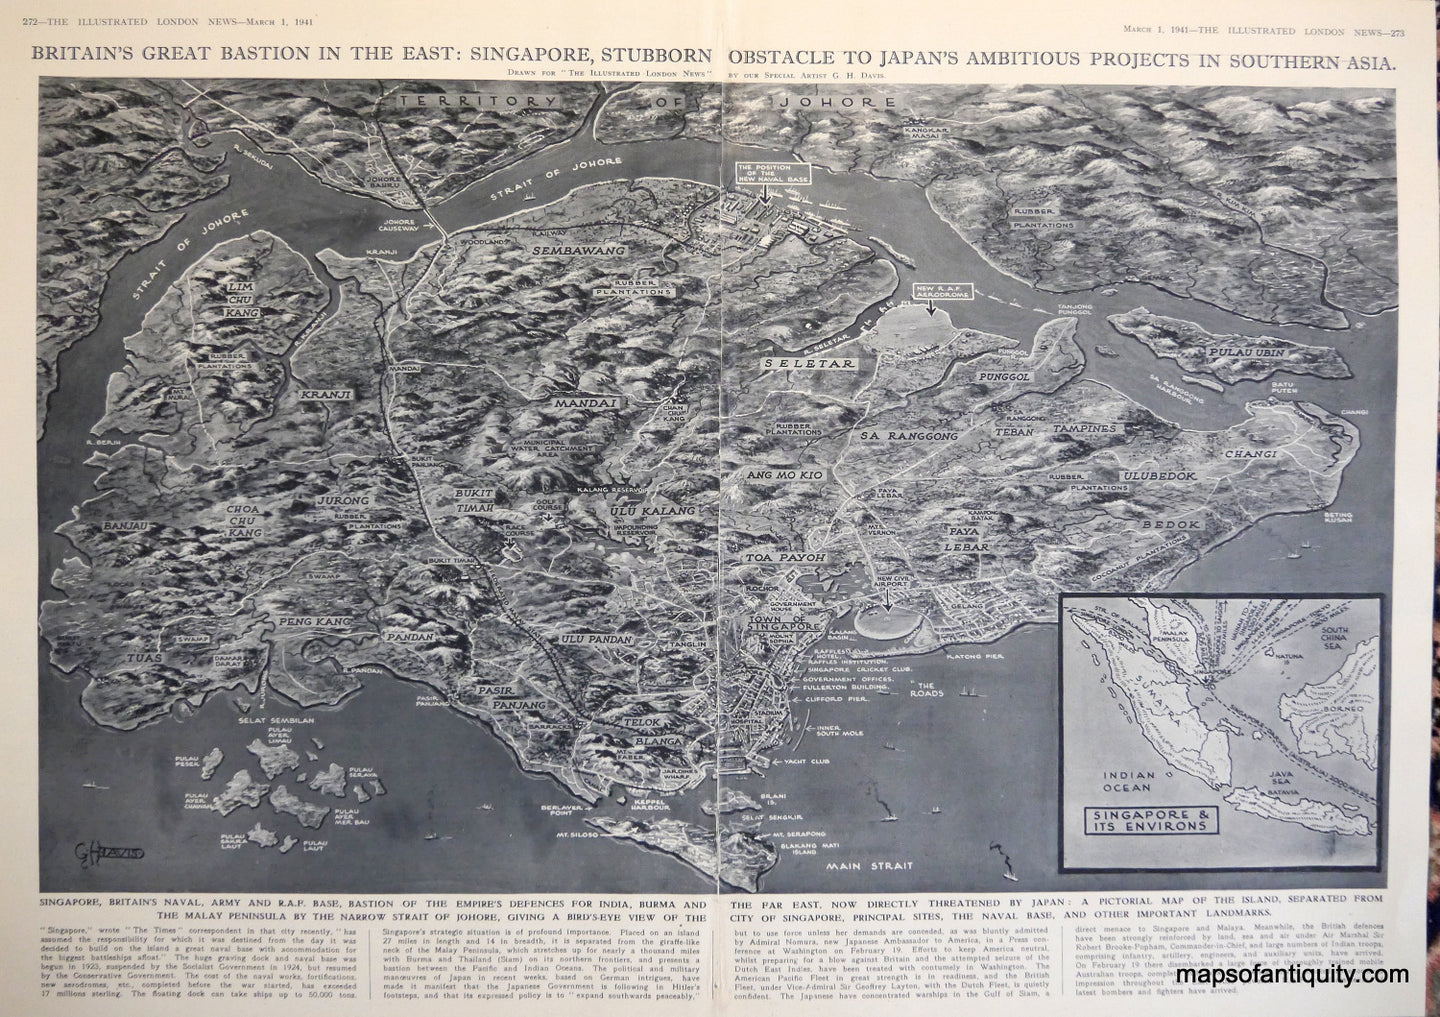 Pictorial-map-Britain's-Great-Bastion-in-the-East:-Singapore-Stubborn-Obstacle-to-Japan's-Ambitious-Projects-in-Southern-Asia.-**********-United-States-Asia-1941-The-Illustrated-London-News-Maps-Of-Antiquity